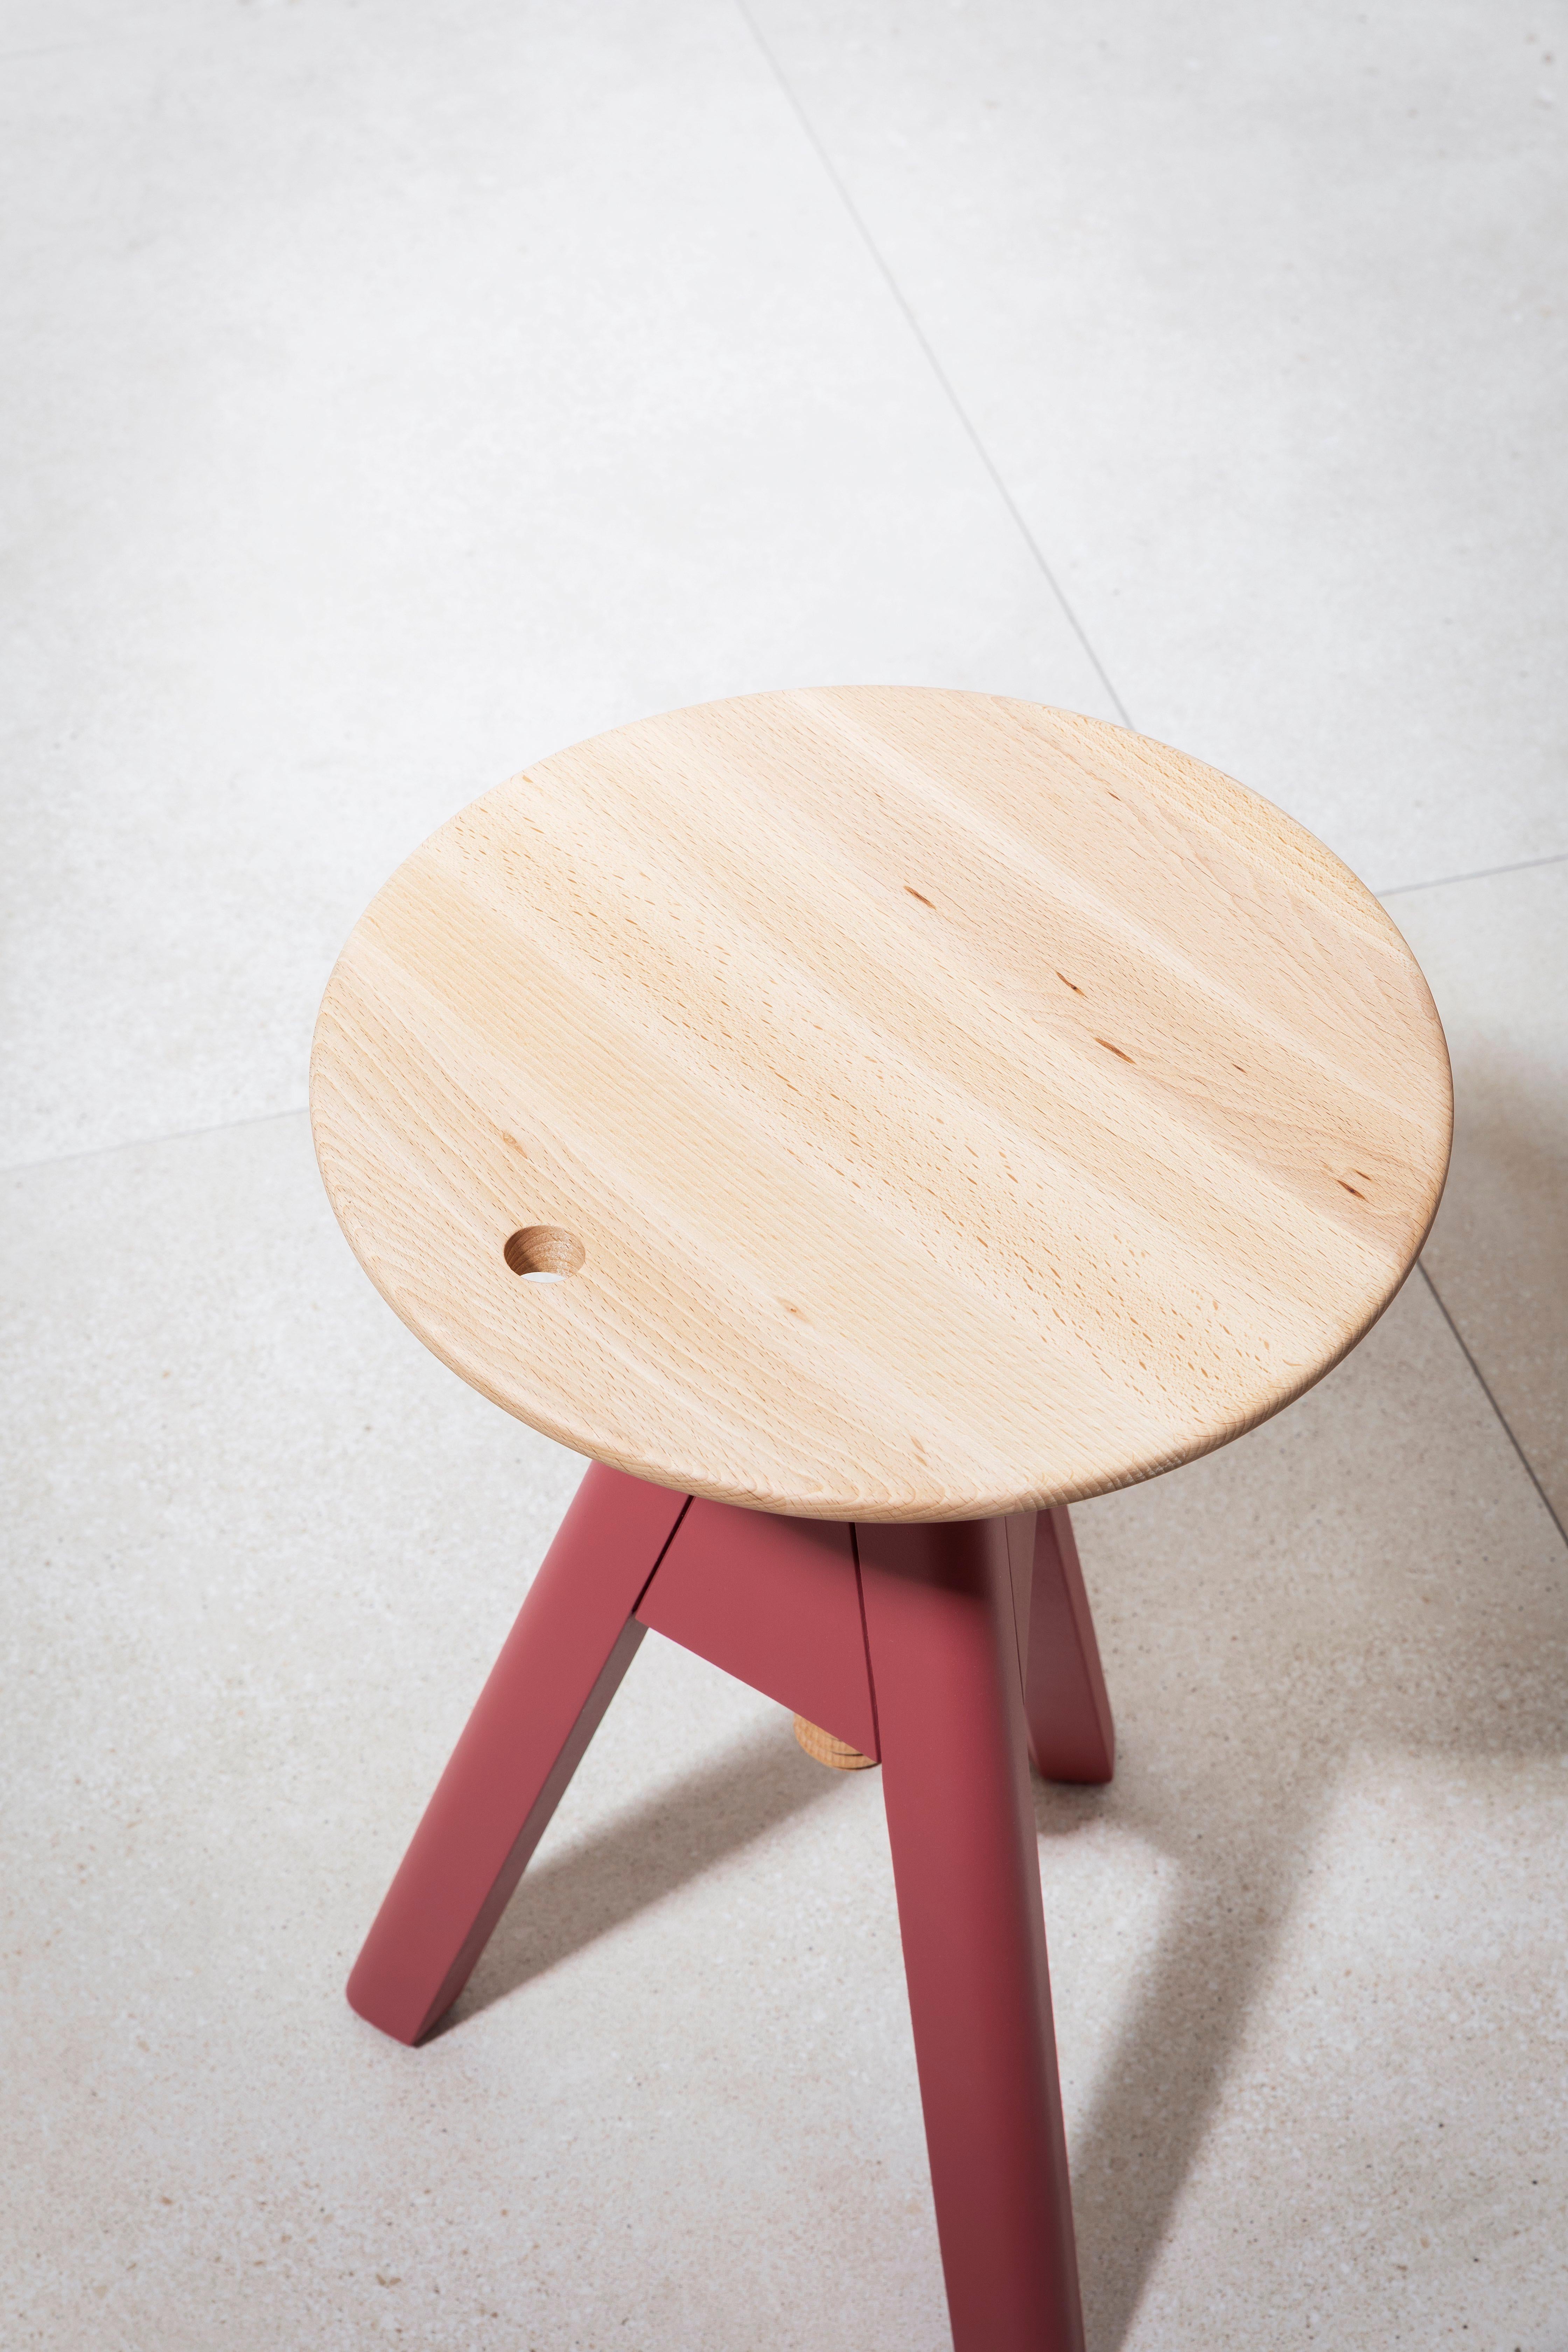 Vitos uses colour to refresh spaces and wood to clear away the excess. The form is playful and iconic, easily standing out in the market. Available in low, medium and tall.

Additional Information:
Material: Wood
Finish: Beech Seat, Lacquer